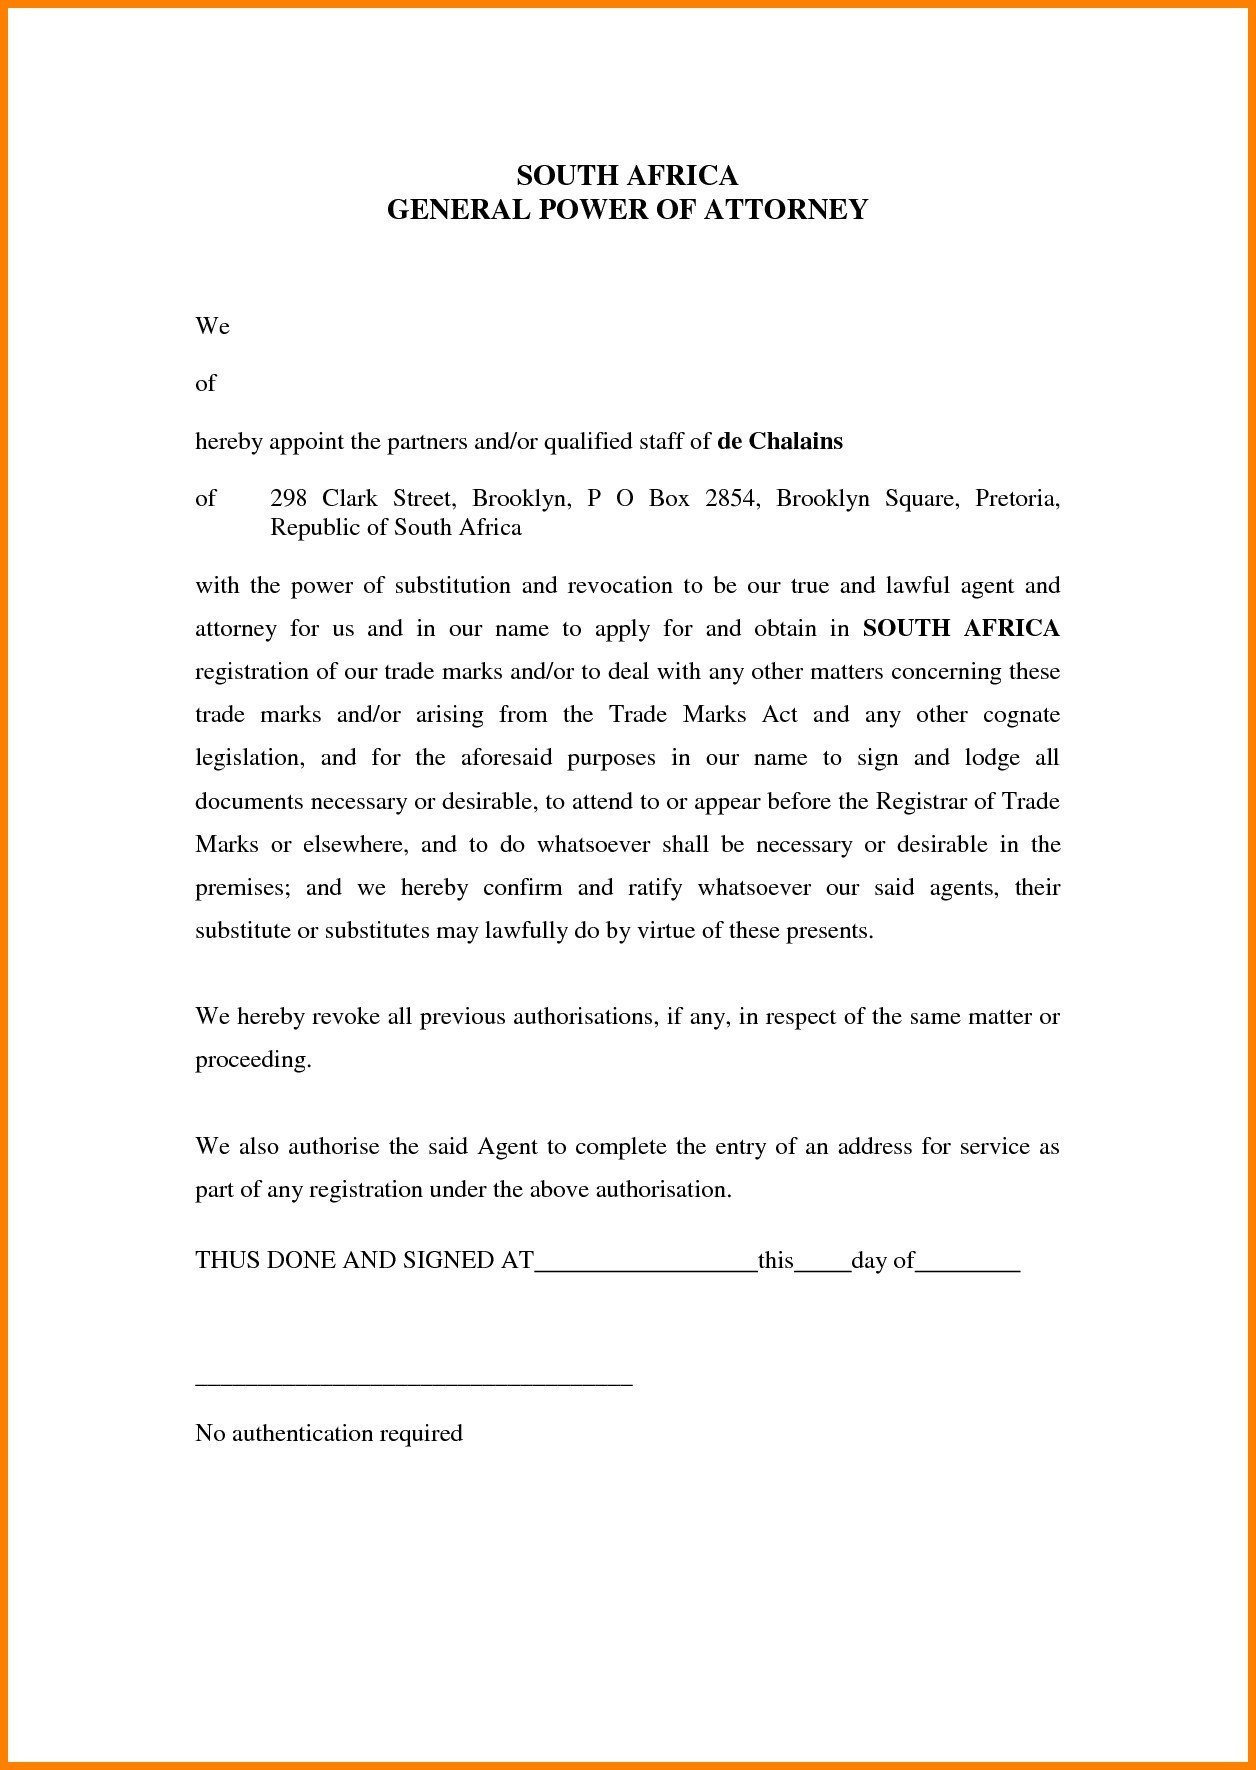 Notarized Letter for Guardianship Template Collection